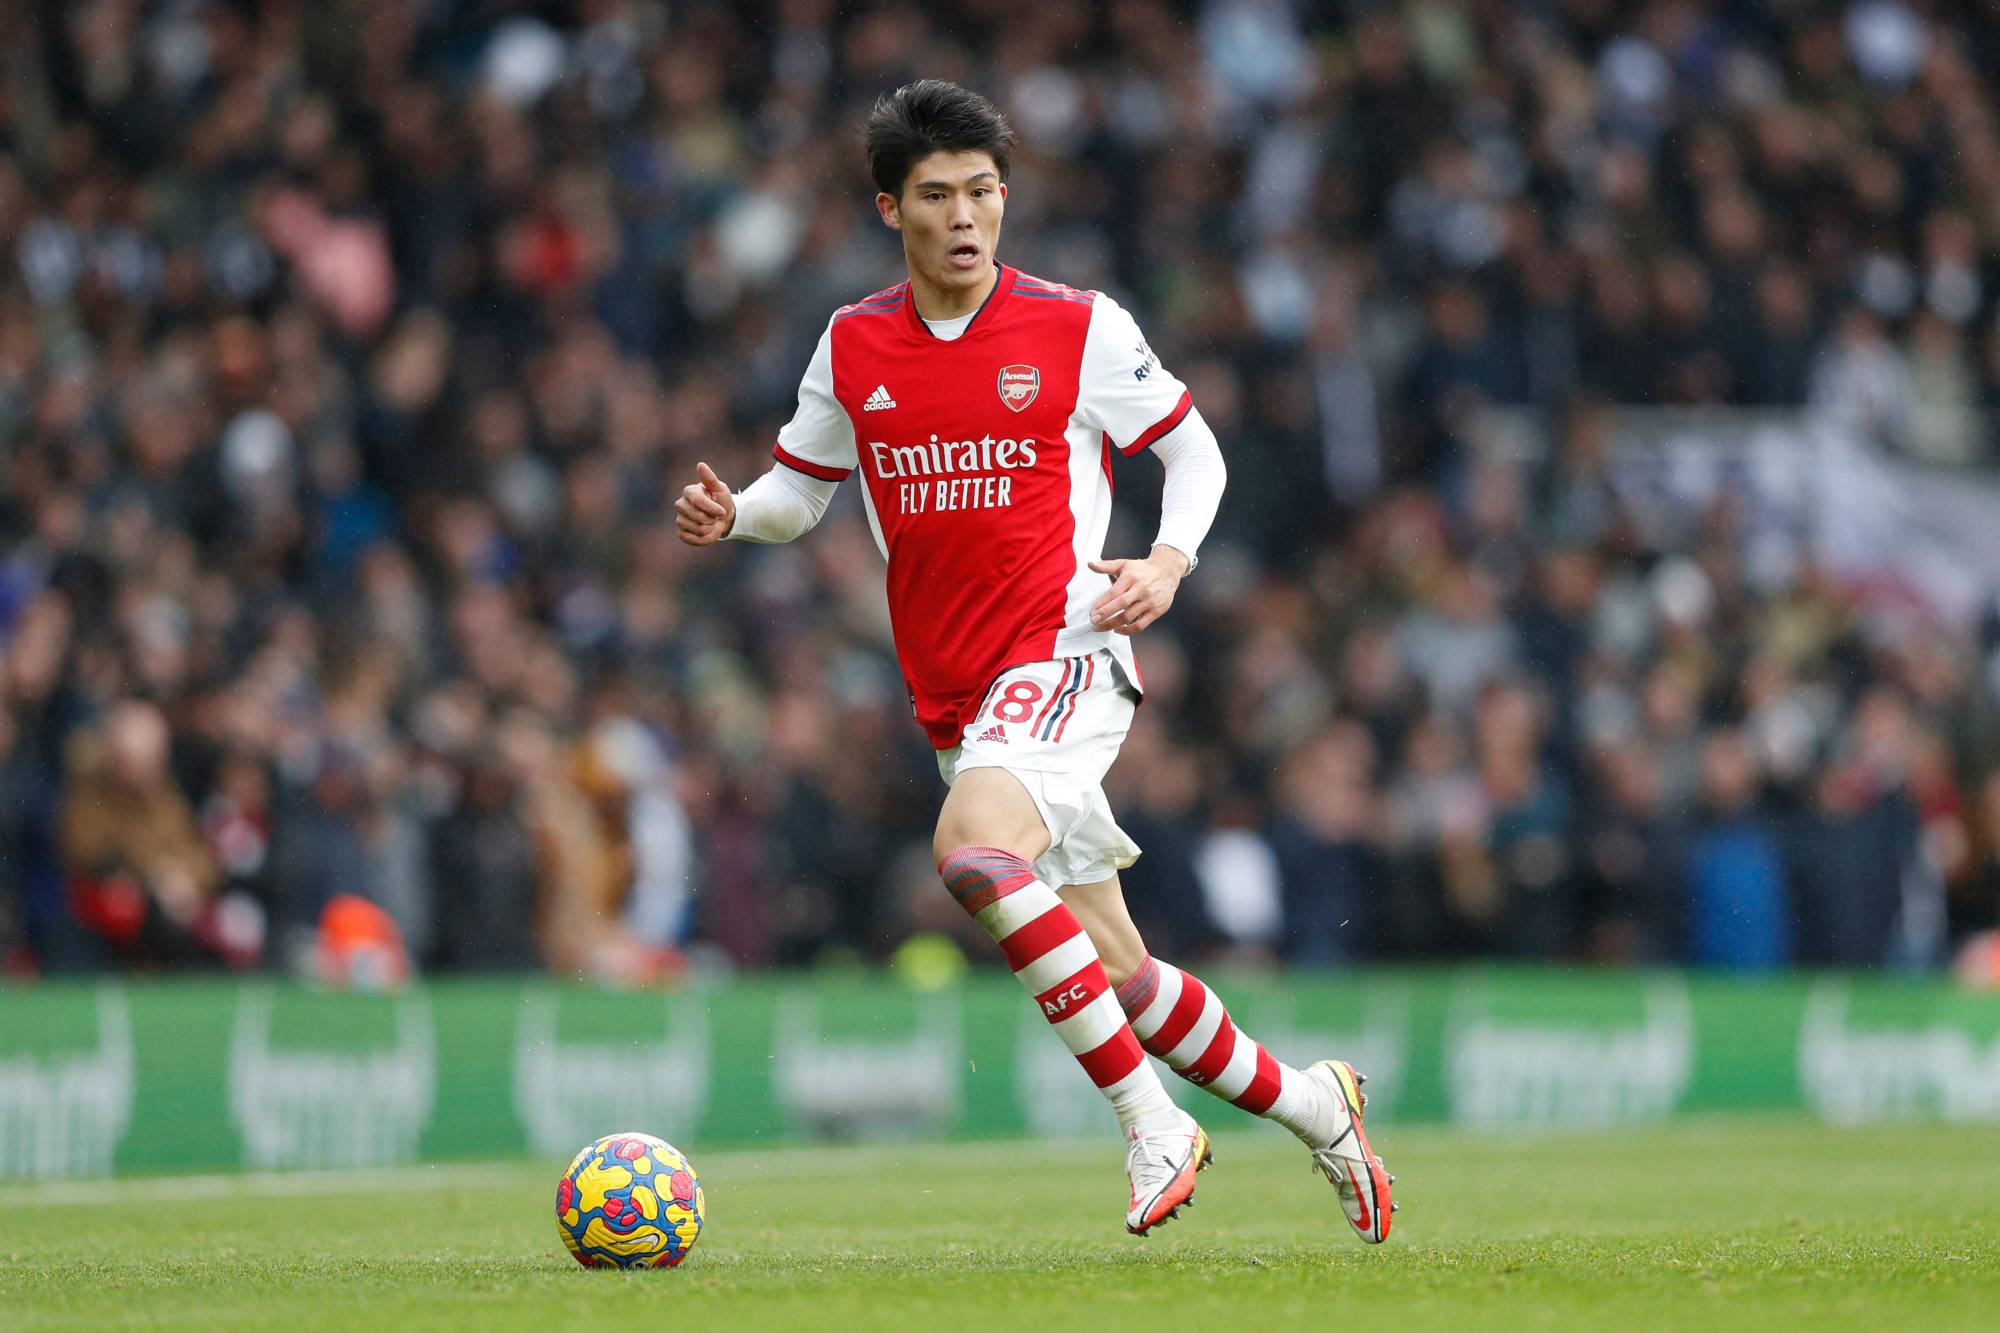 Tomiyasu is one of the best budget defenders for FPL this season